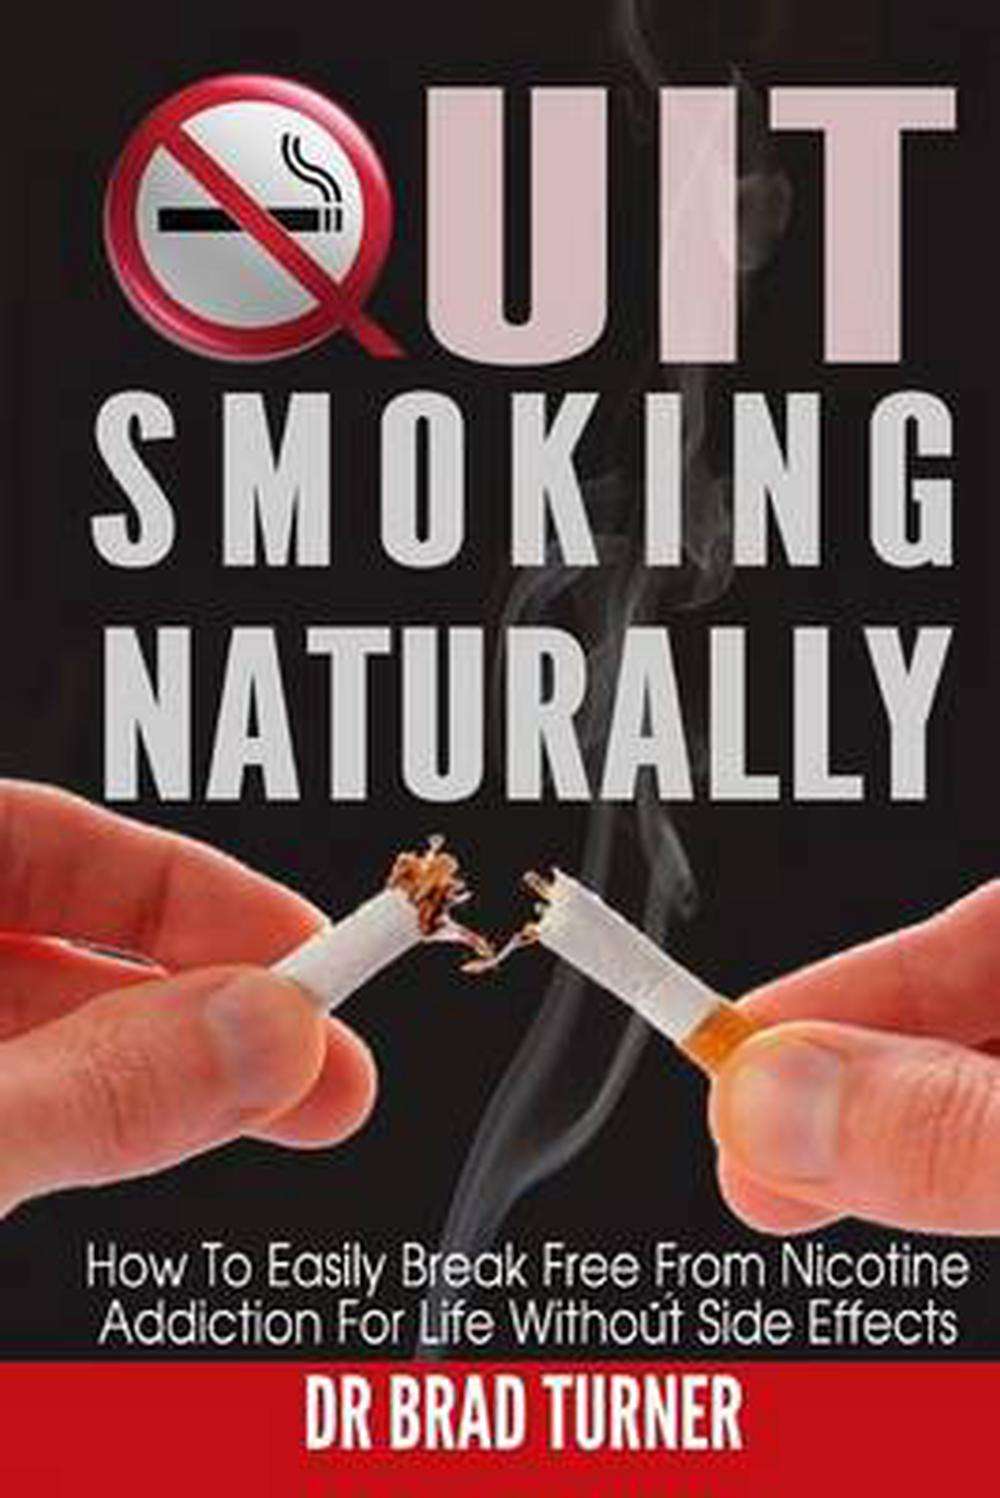 Quit Smoking Naturally: How to Break Free from Nicotine ...